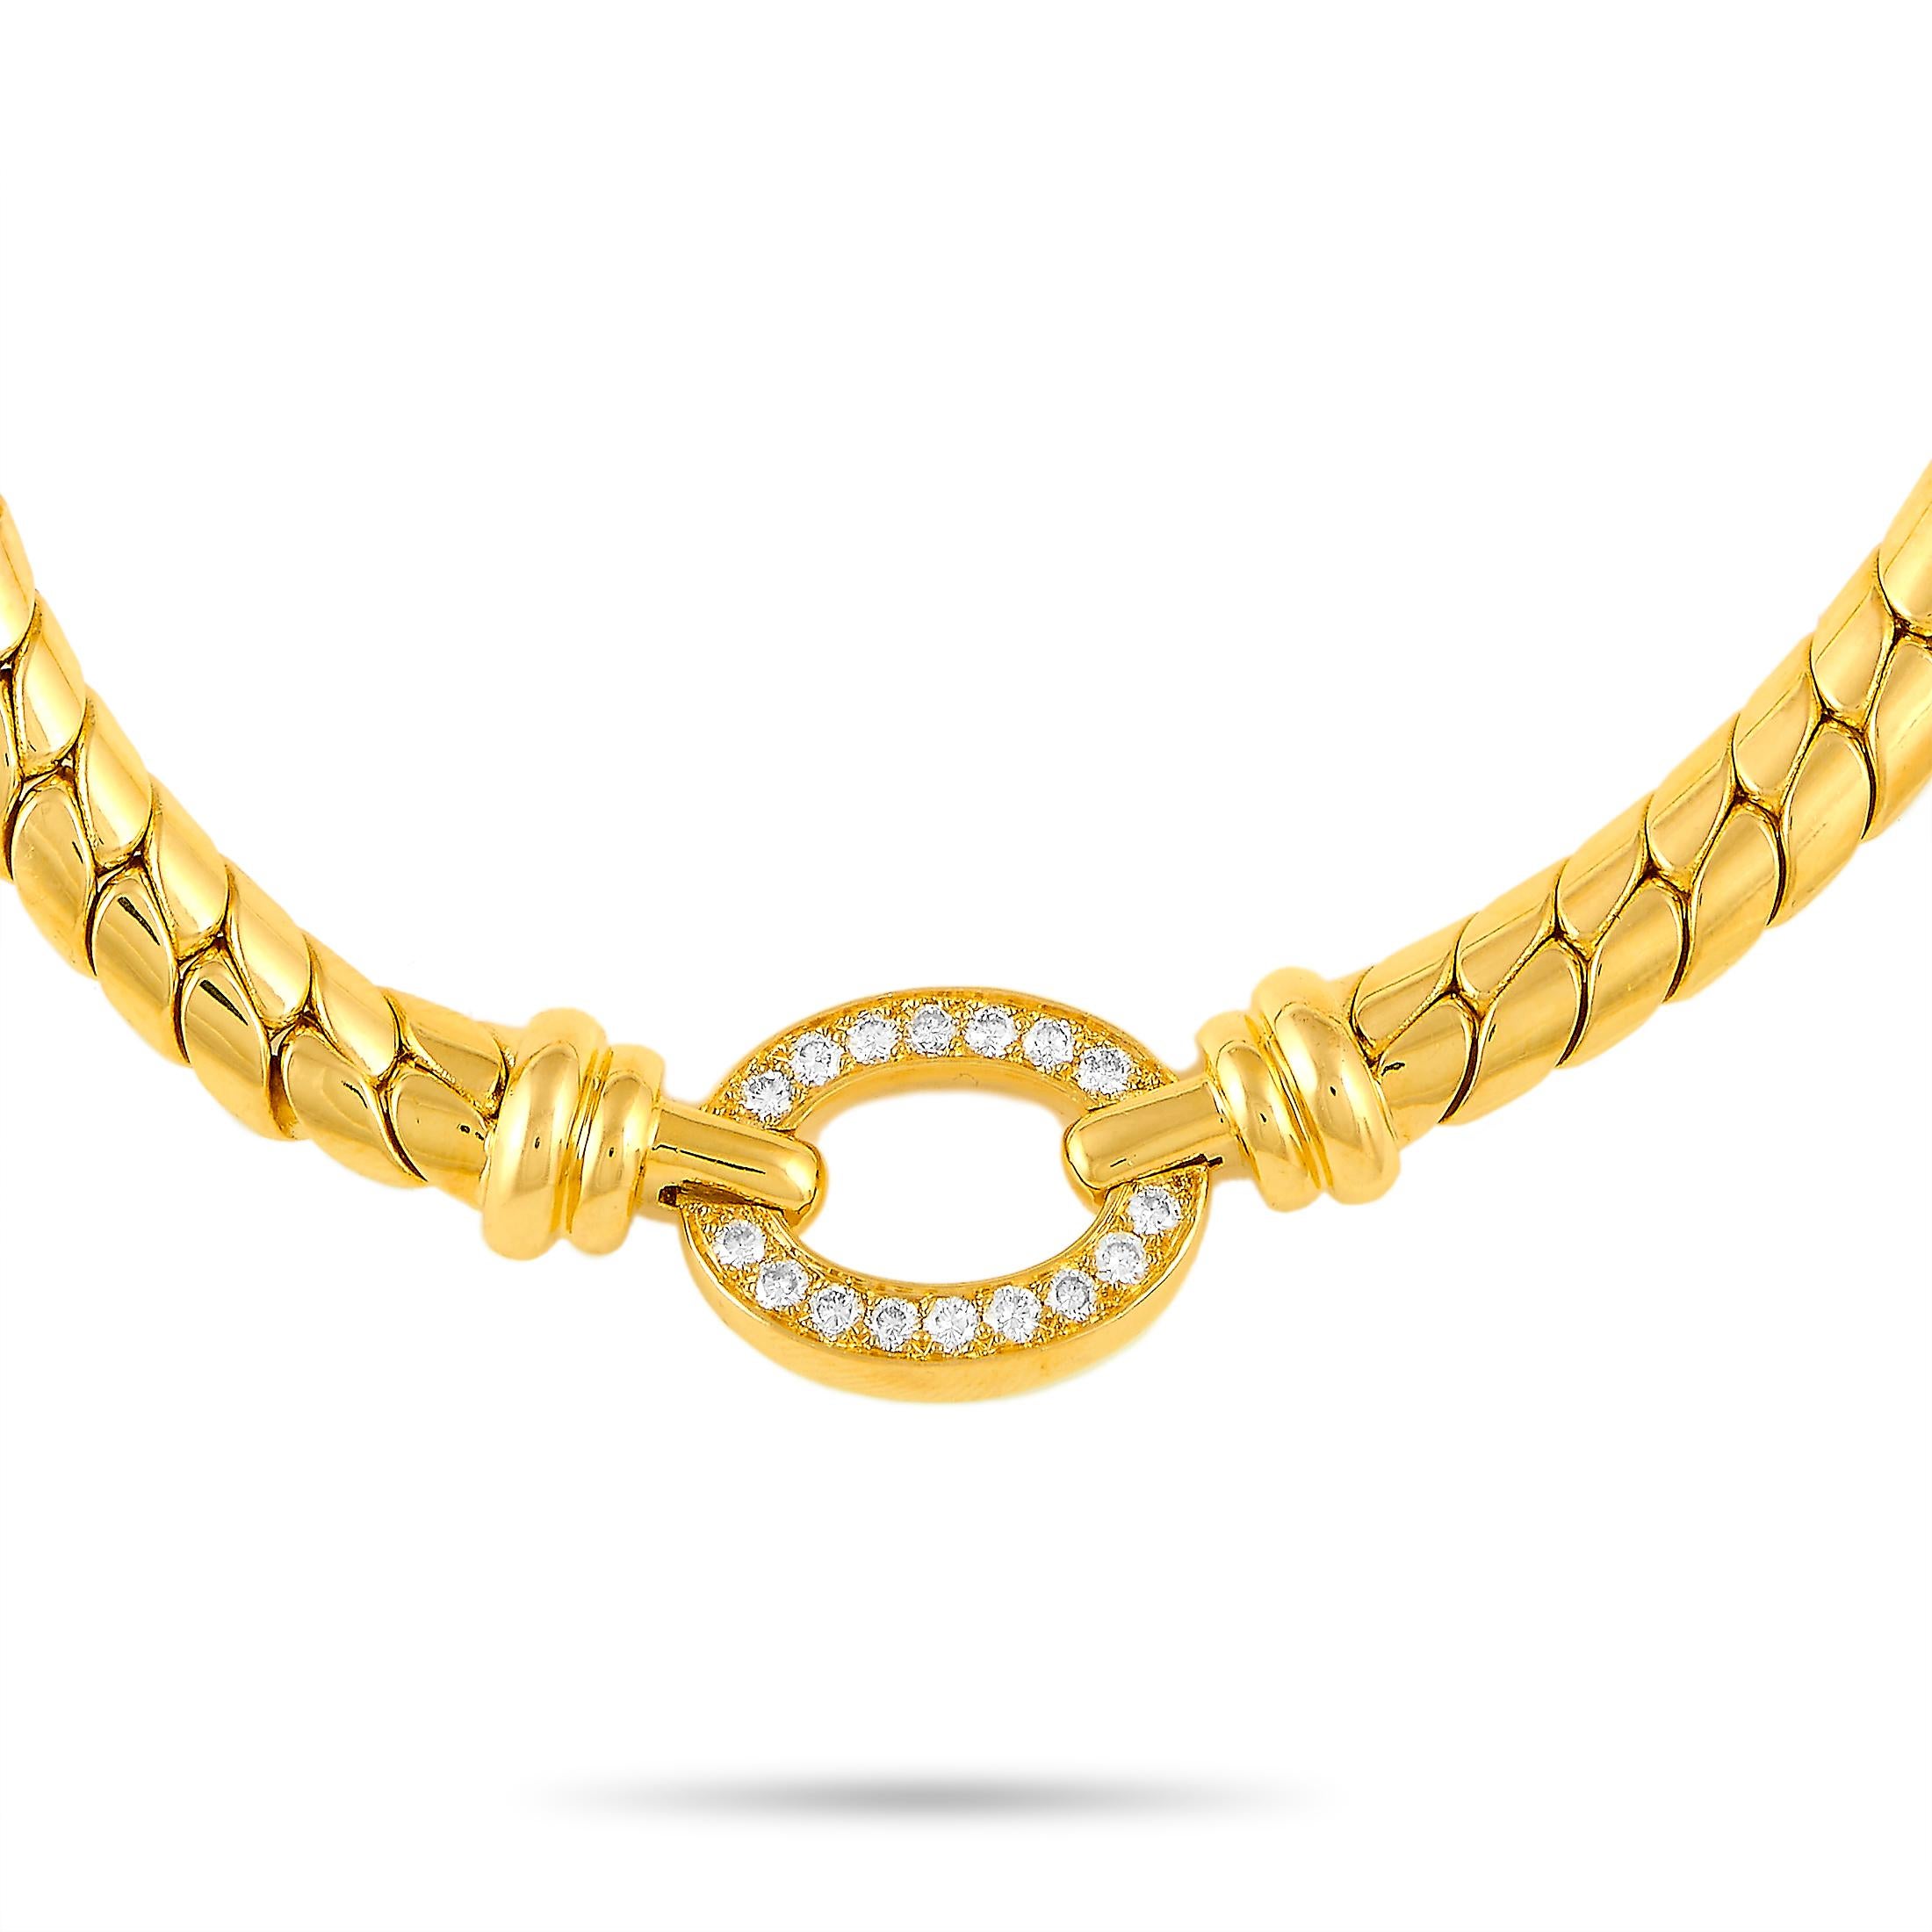 This vintage Van Cleef & Arpels necklace is made of 18K yellow gold and weighs 45.1 grams, measuring 17” in length. The necklace is embellished with diamonds that feature F color and VVS1 clarity and amount to 0.61 carats.

Offered in estate